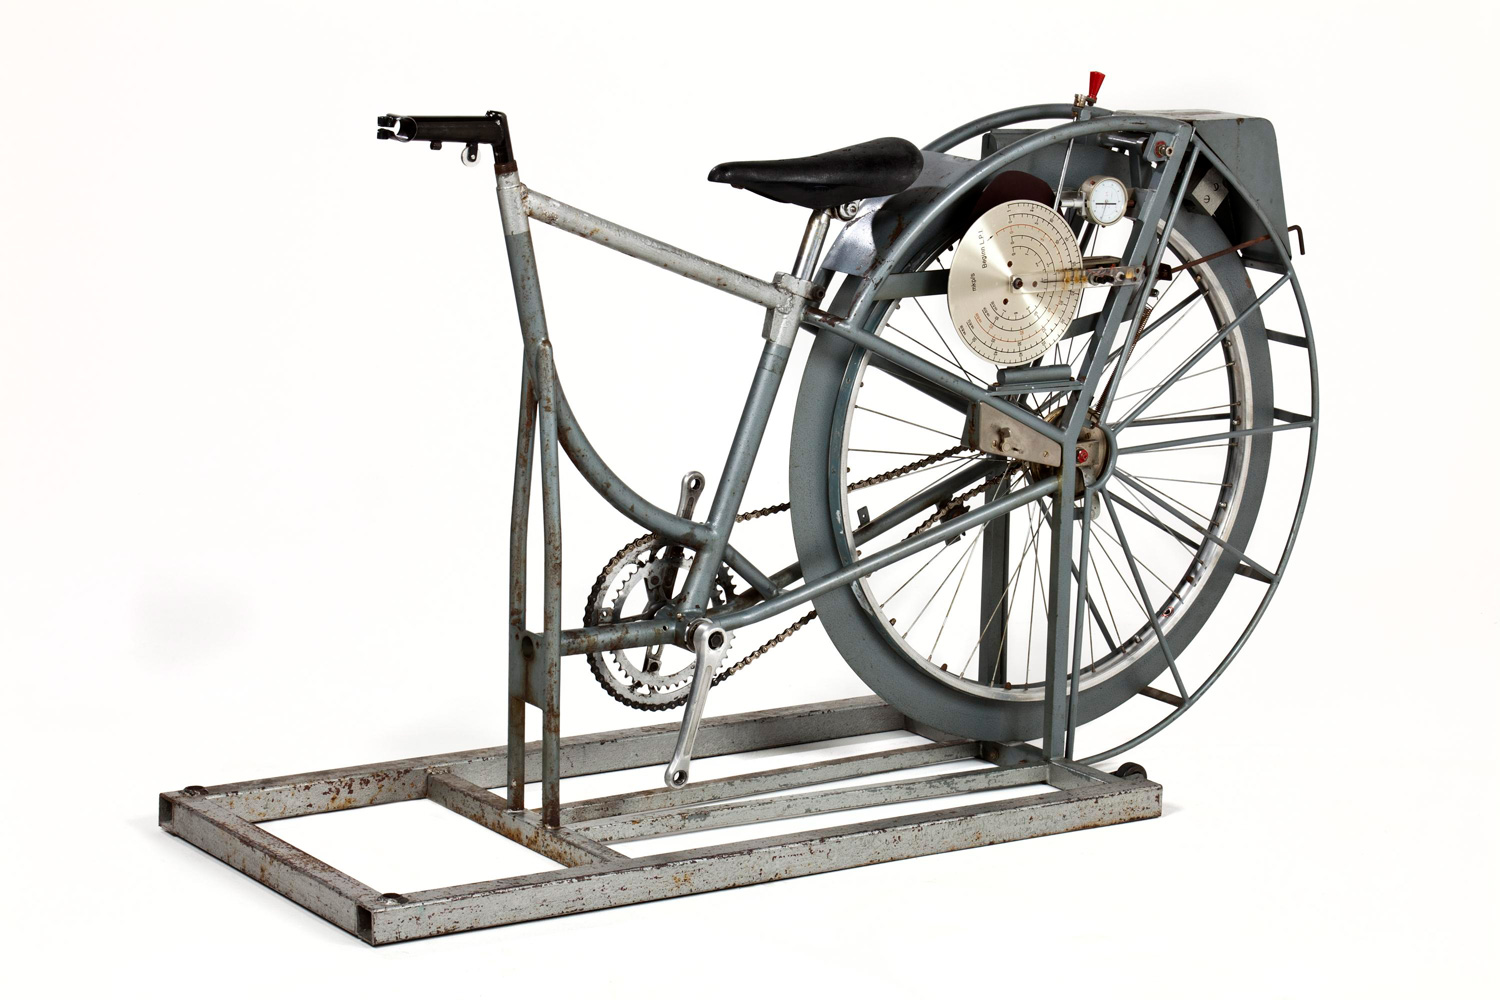 A bicycle-like machine, with no front wheel and fixed to a frame